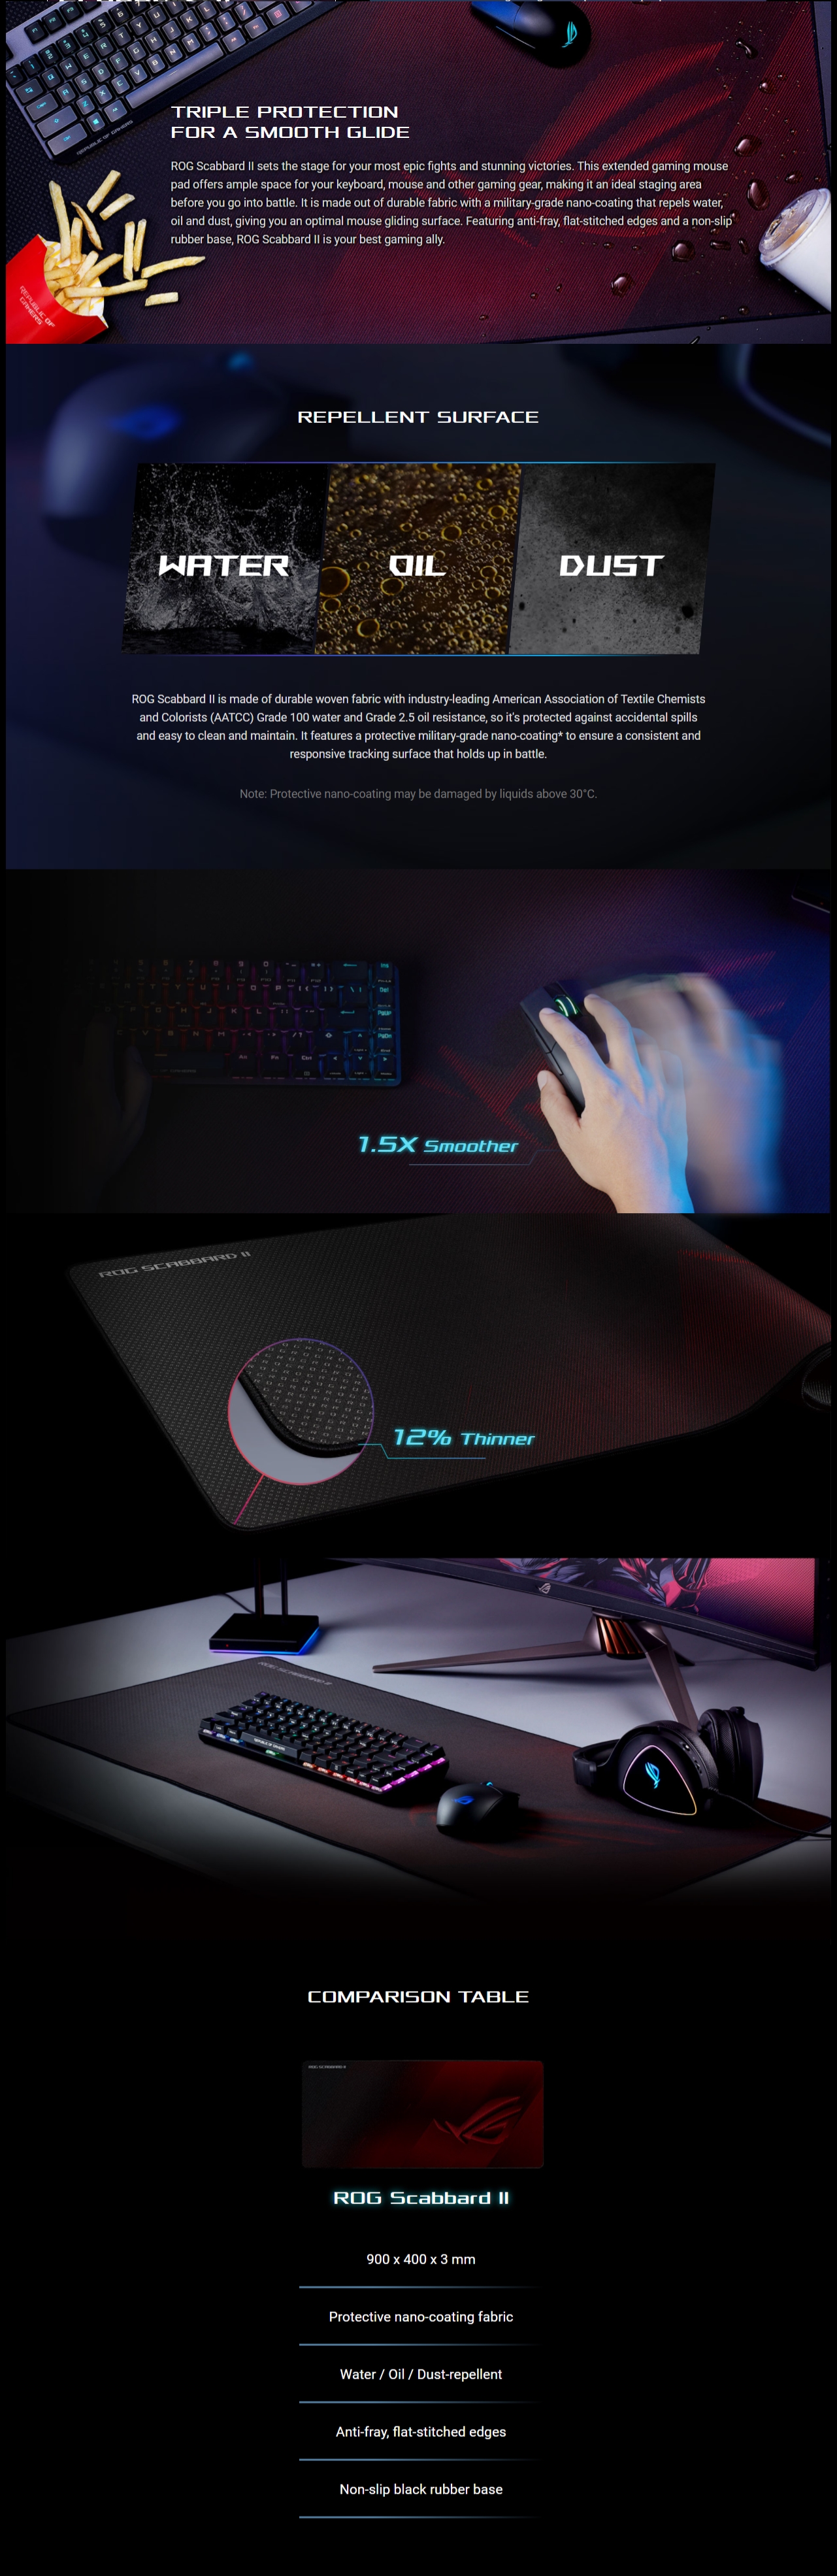 A large marketing image providing additional information about the product Asus ROG Scabbard II Extended Gaming Mousemat - Additional alt info not provided